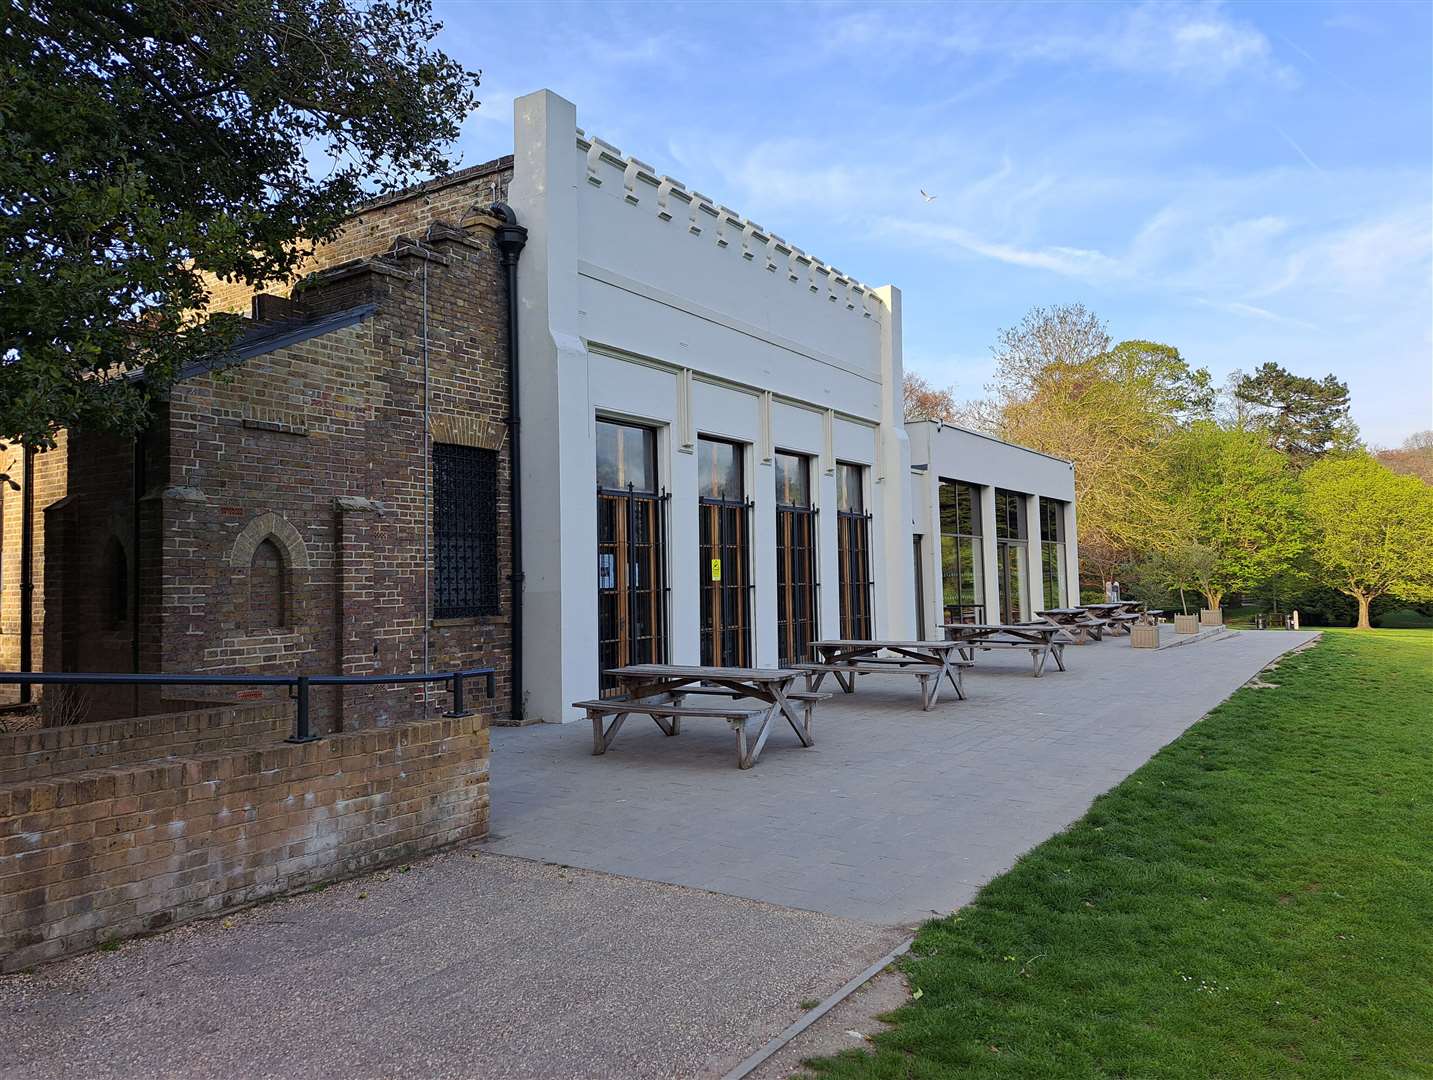 The Kearsney Abbey cafe and billiards room which now has permission to host weddings